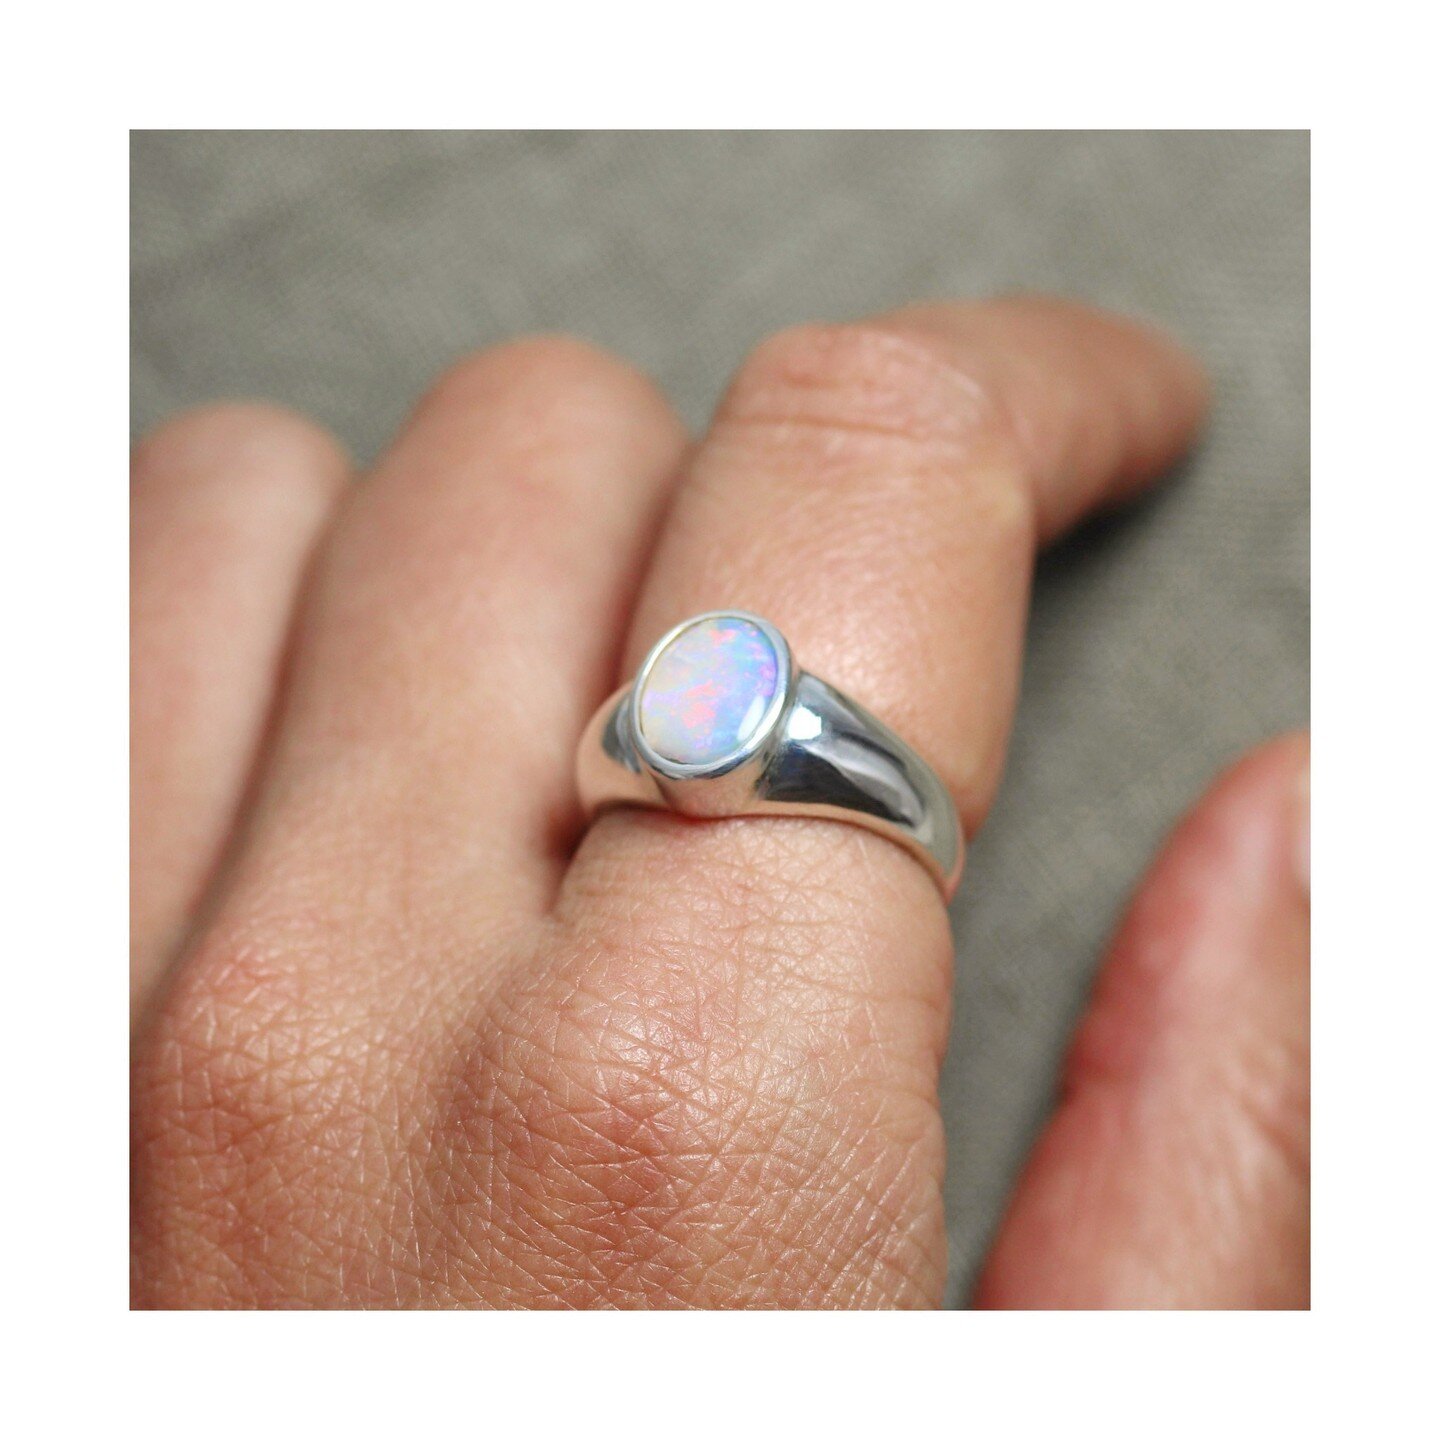 S O P H I A, the newest addition to our collection, is a bold signet style ring with an elegantly tapered shank in sterling silver and bezel set with a softly understated 0.7ct crystal opal. Available now in size O 1/2

#opaljewellery #opallove #opal